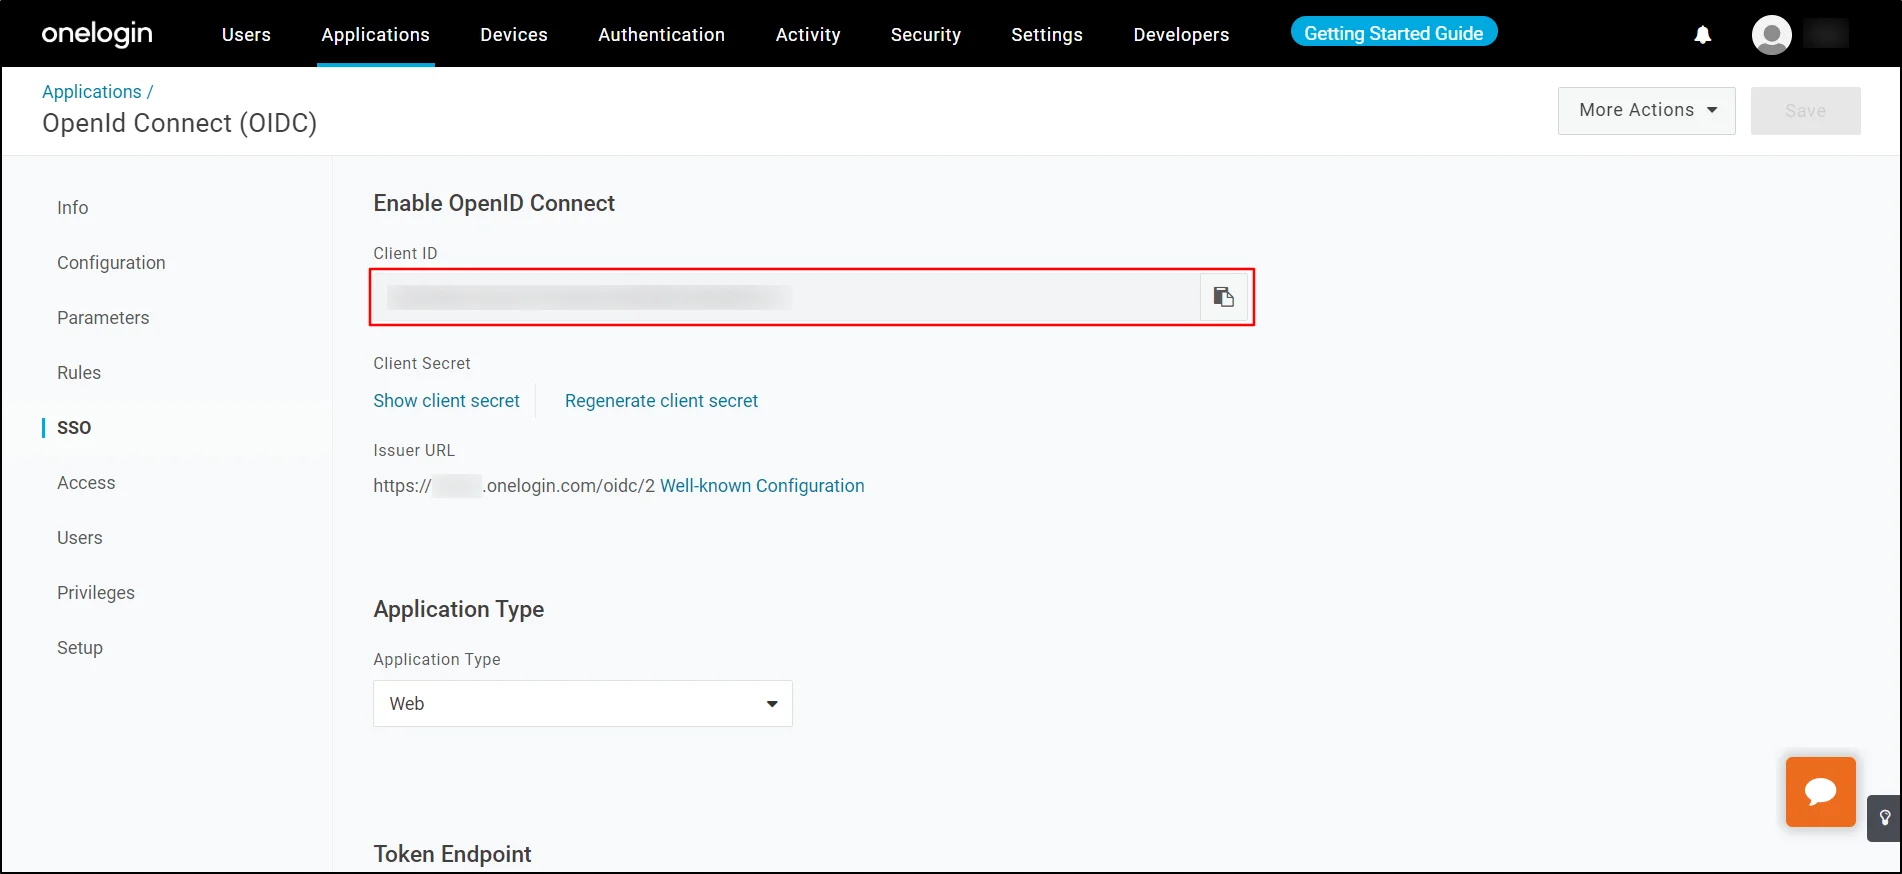 Onelogin OpenID Single Sign-On Login - On the Enable OpenID Connect section, copy the Client ID